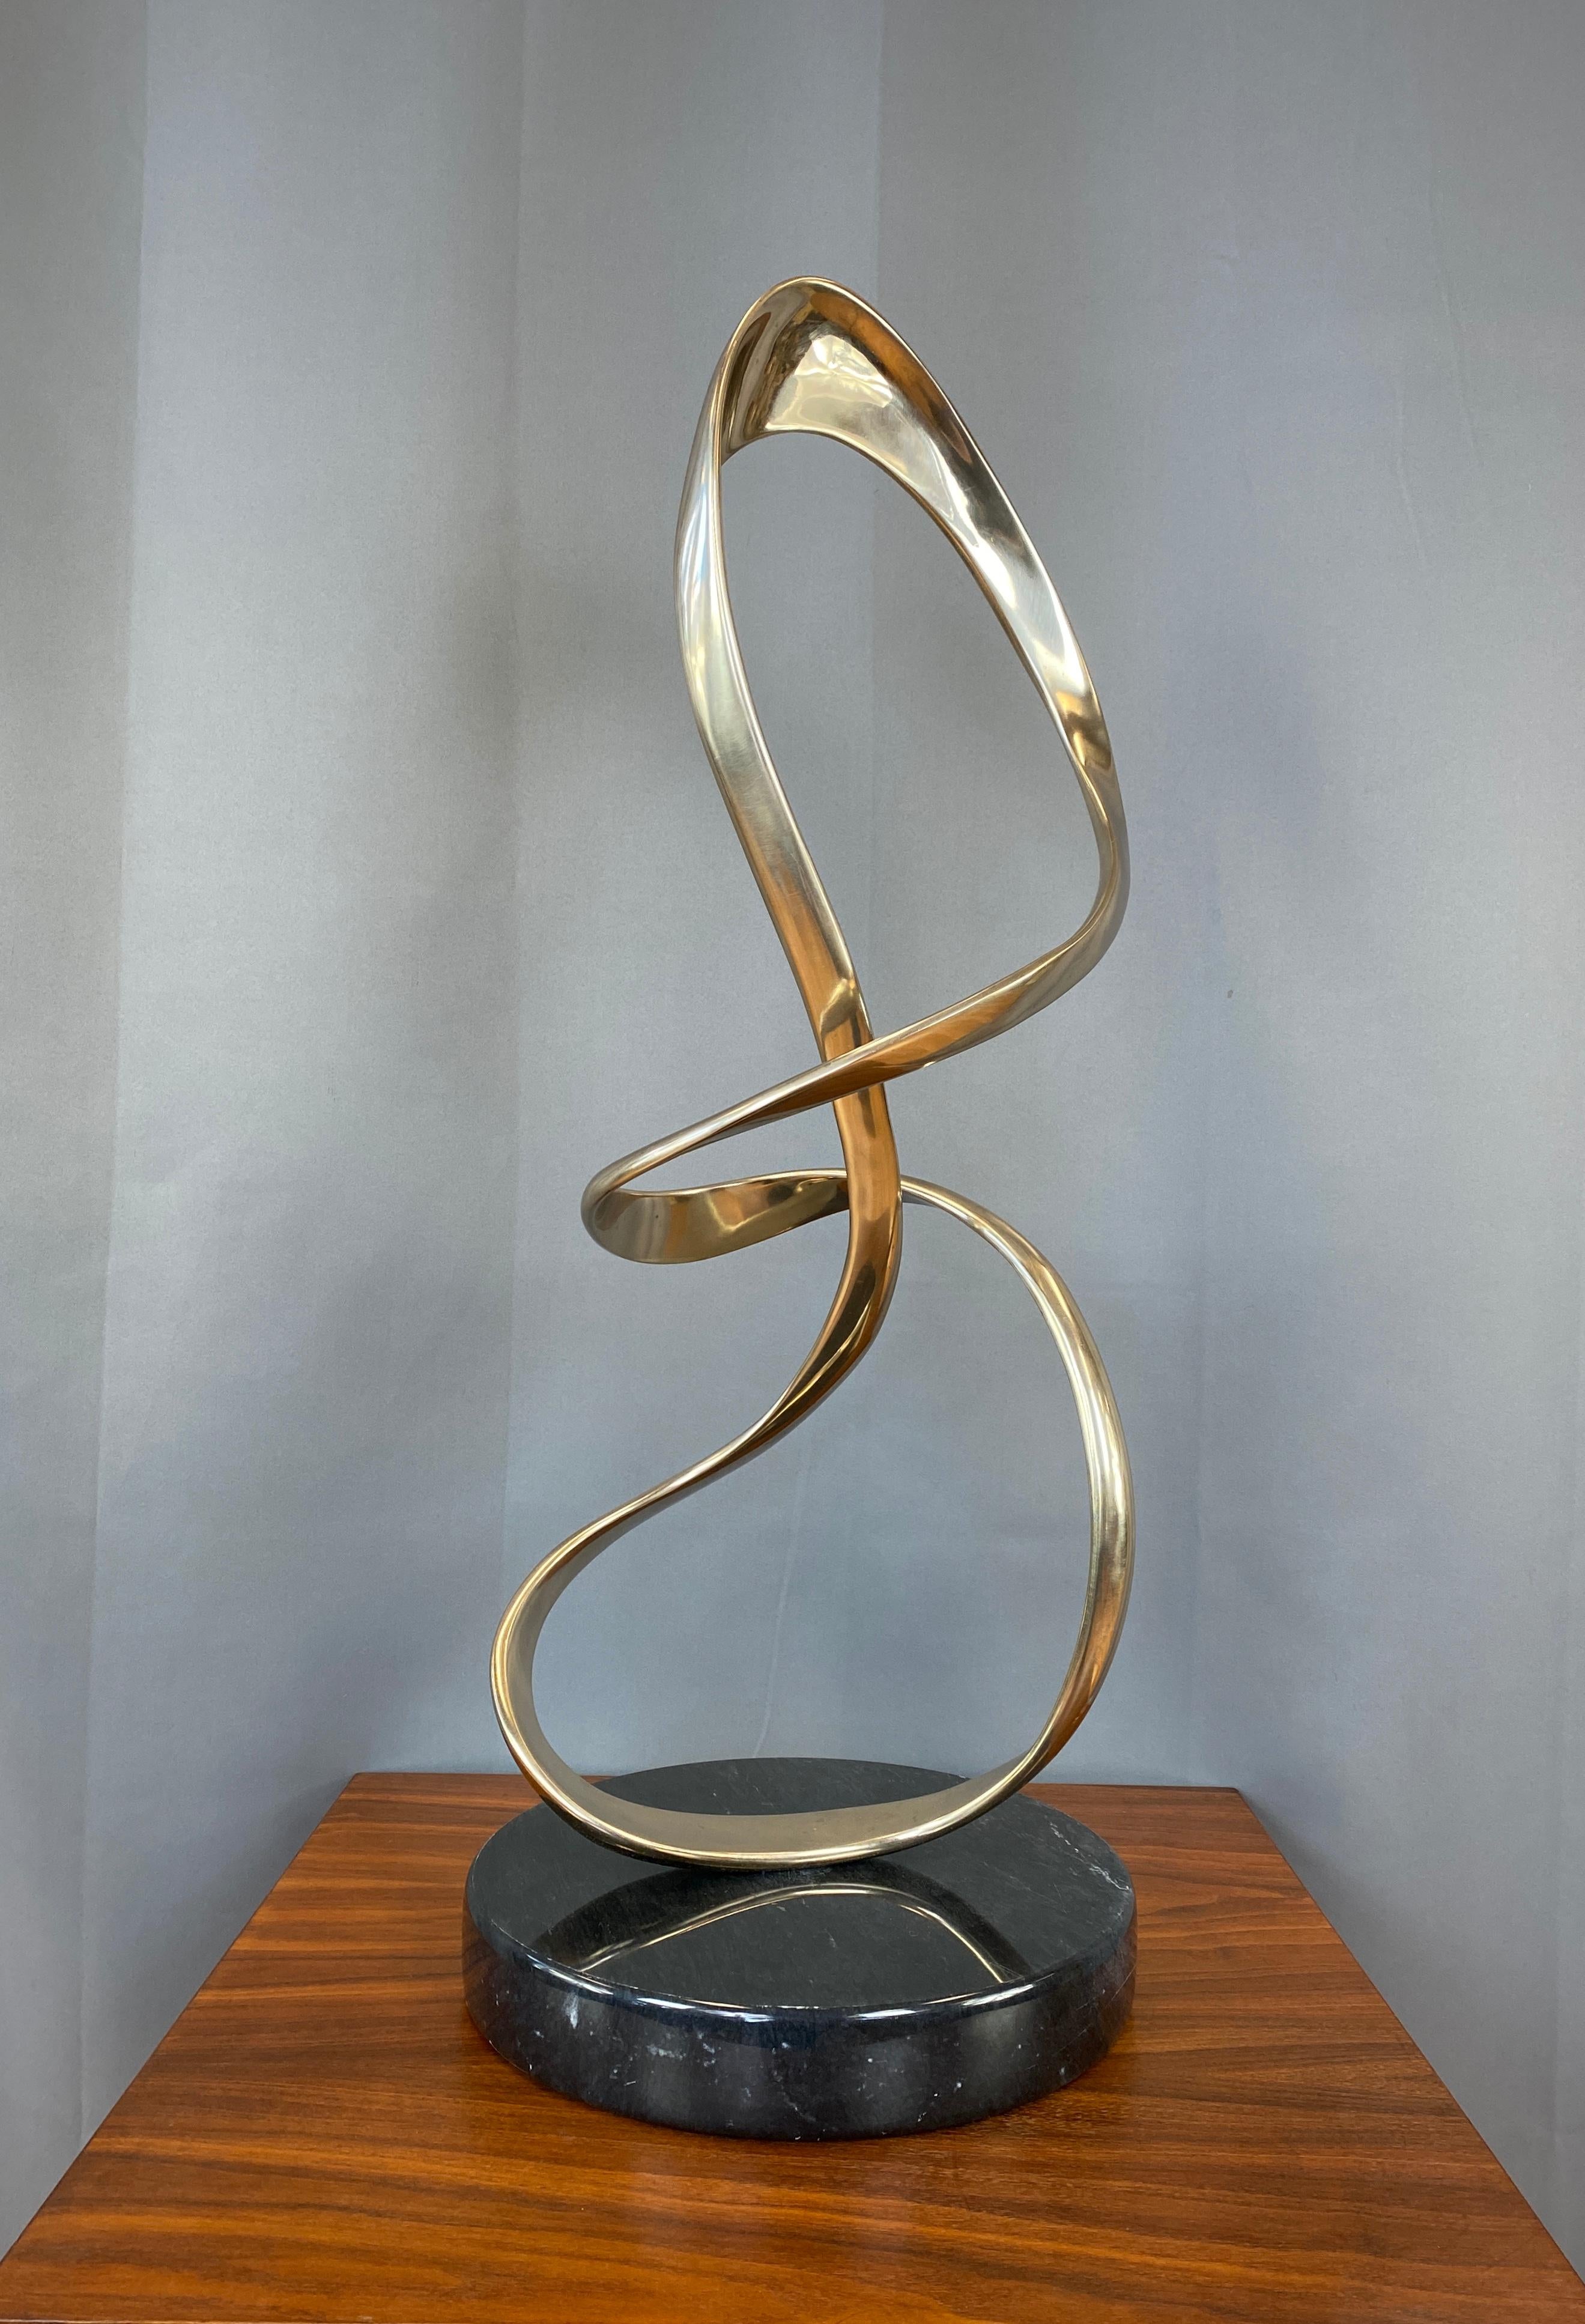 Offered here is a substantial Tom Bennett bronze freeform sculpture with round marble base. Signed and numbered ‘89 14/150

Tom Bennett (death 4-20-16), with his late twin brother late Bob Bennett (death 2006), were Northern California based